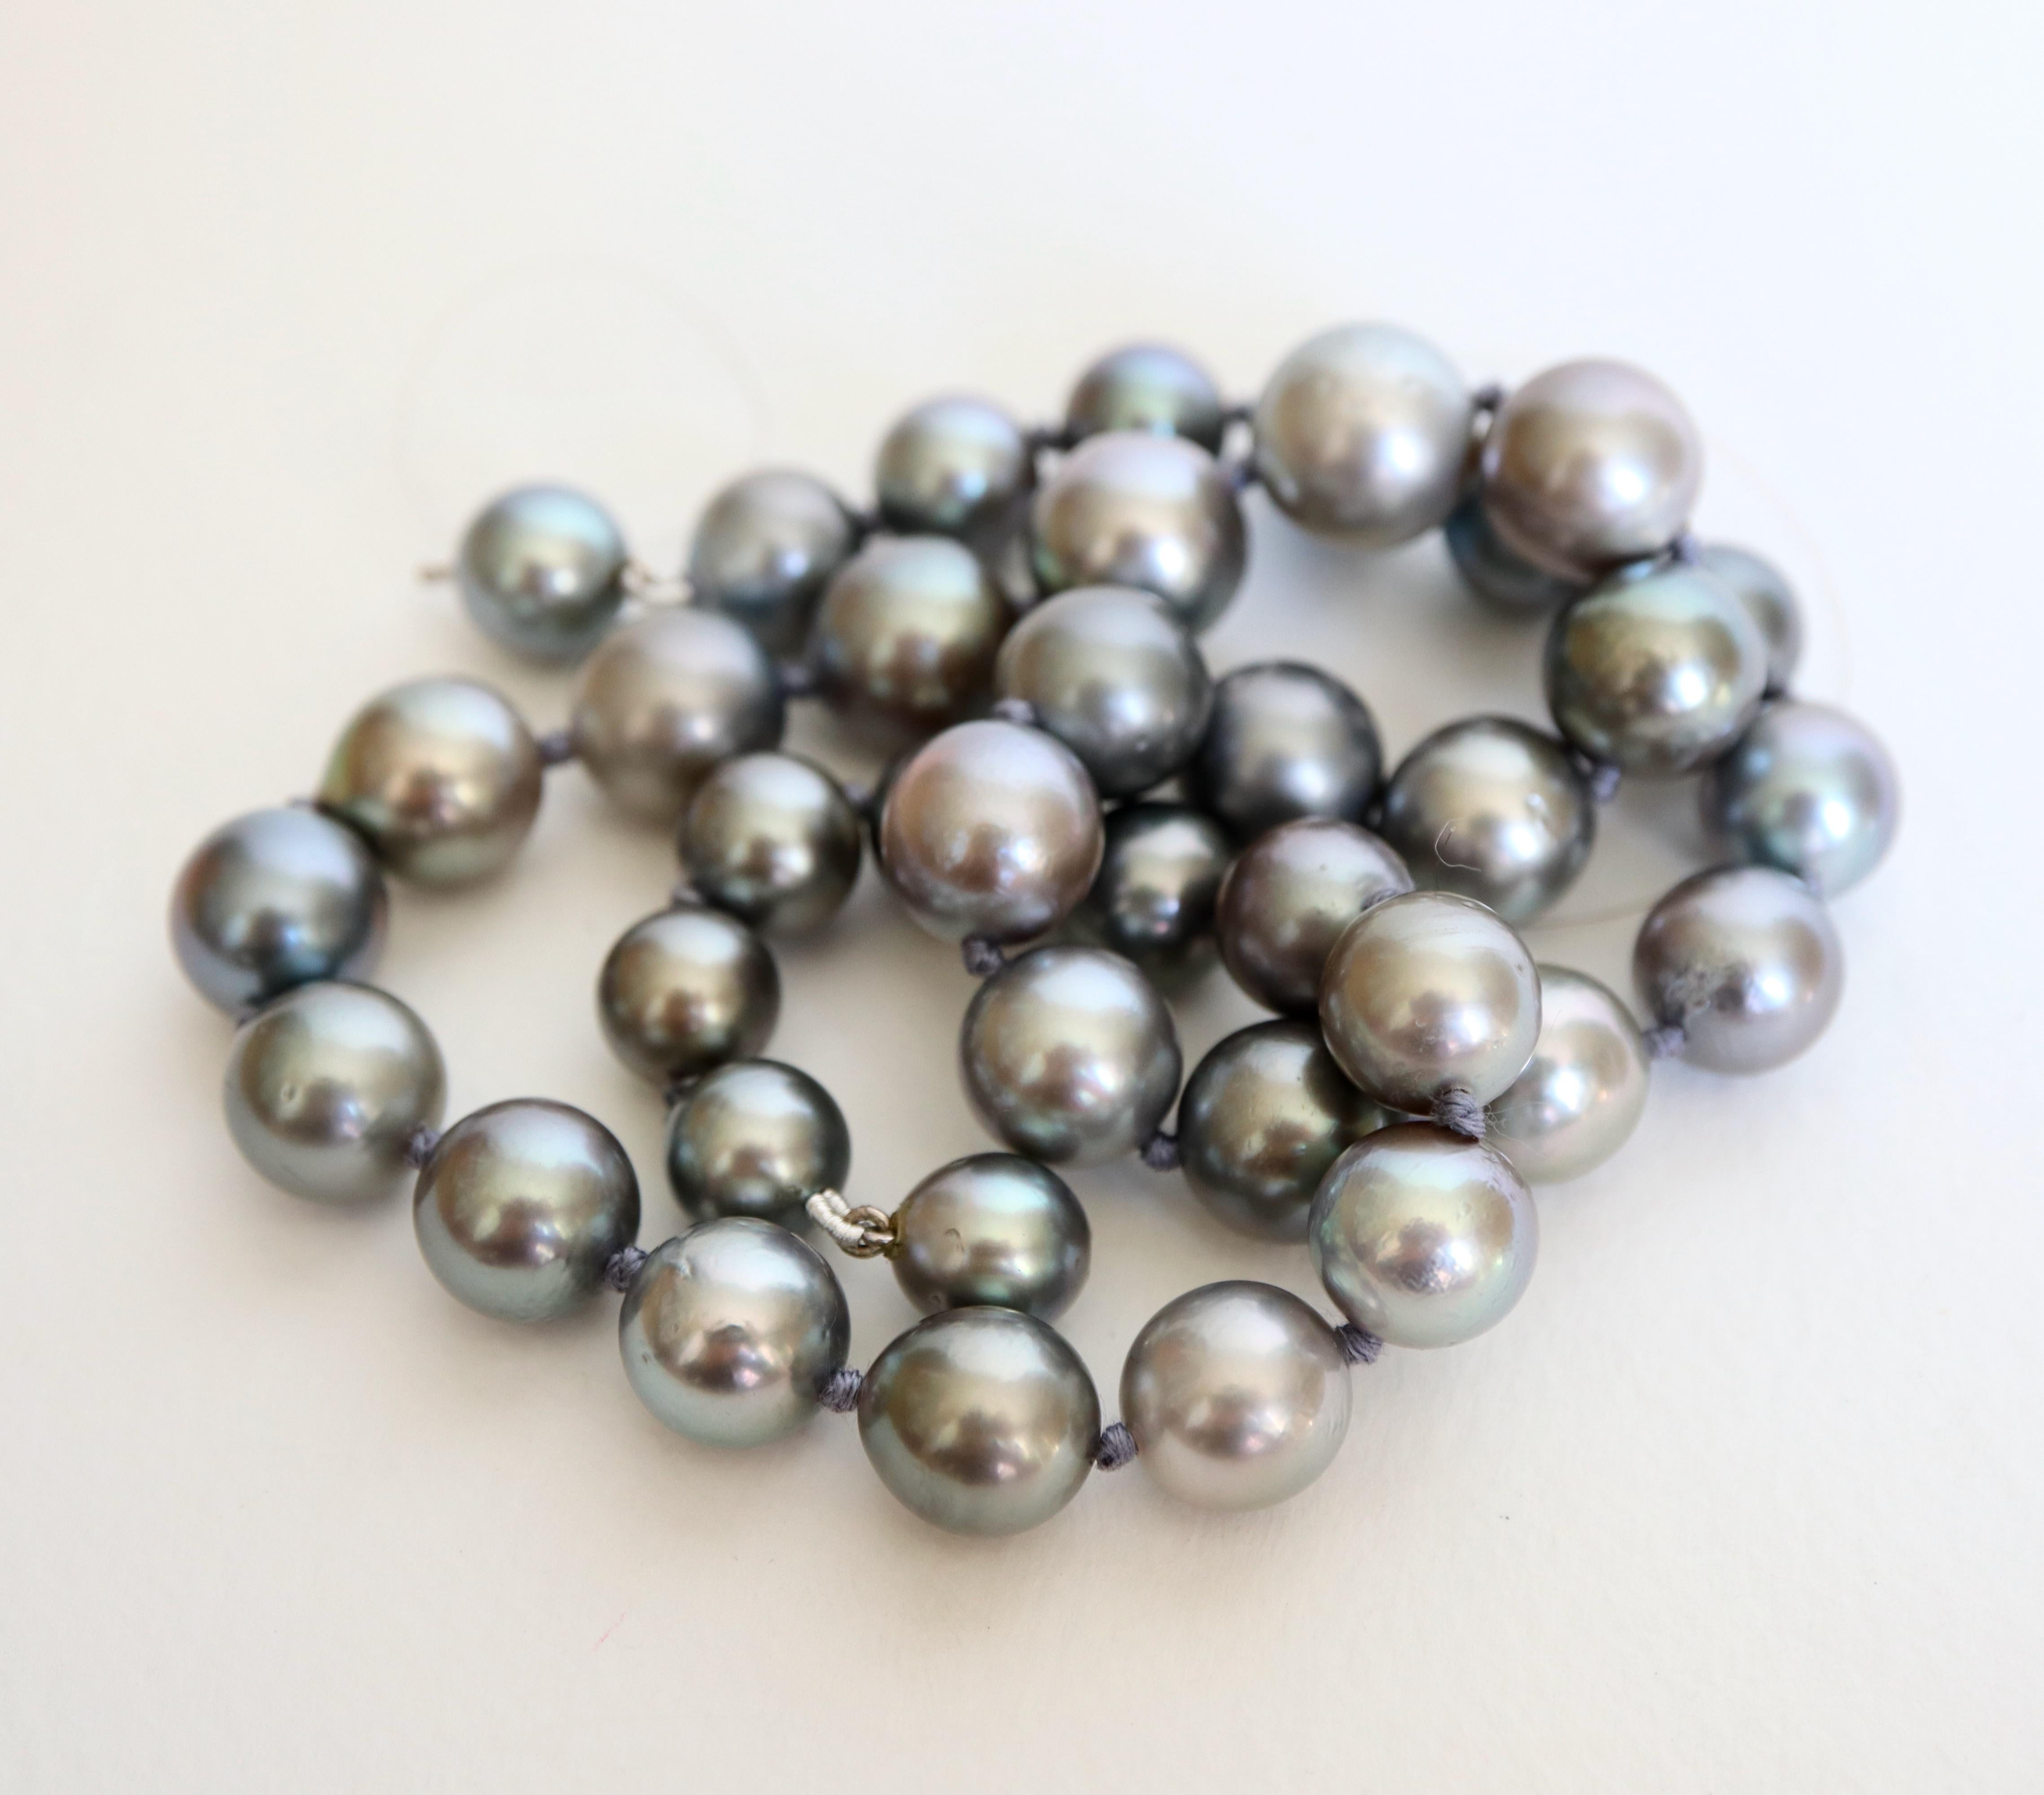 Necklace of Cultured Grey Pearls 9 mm to 13 mm For Sale 3